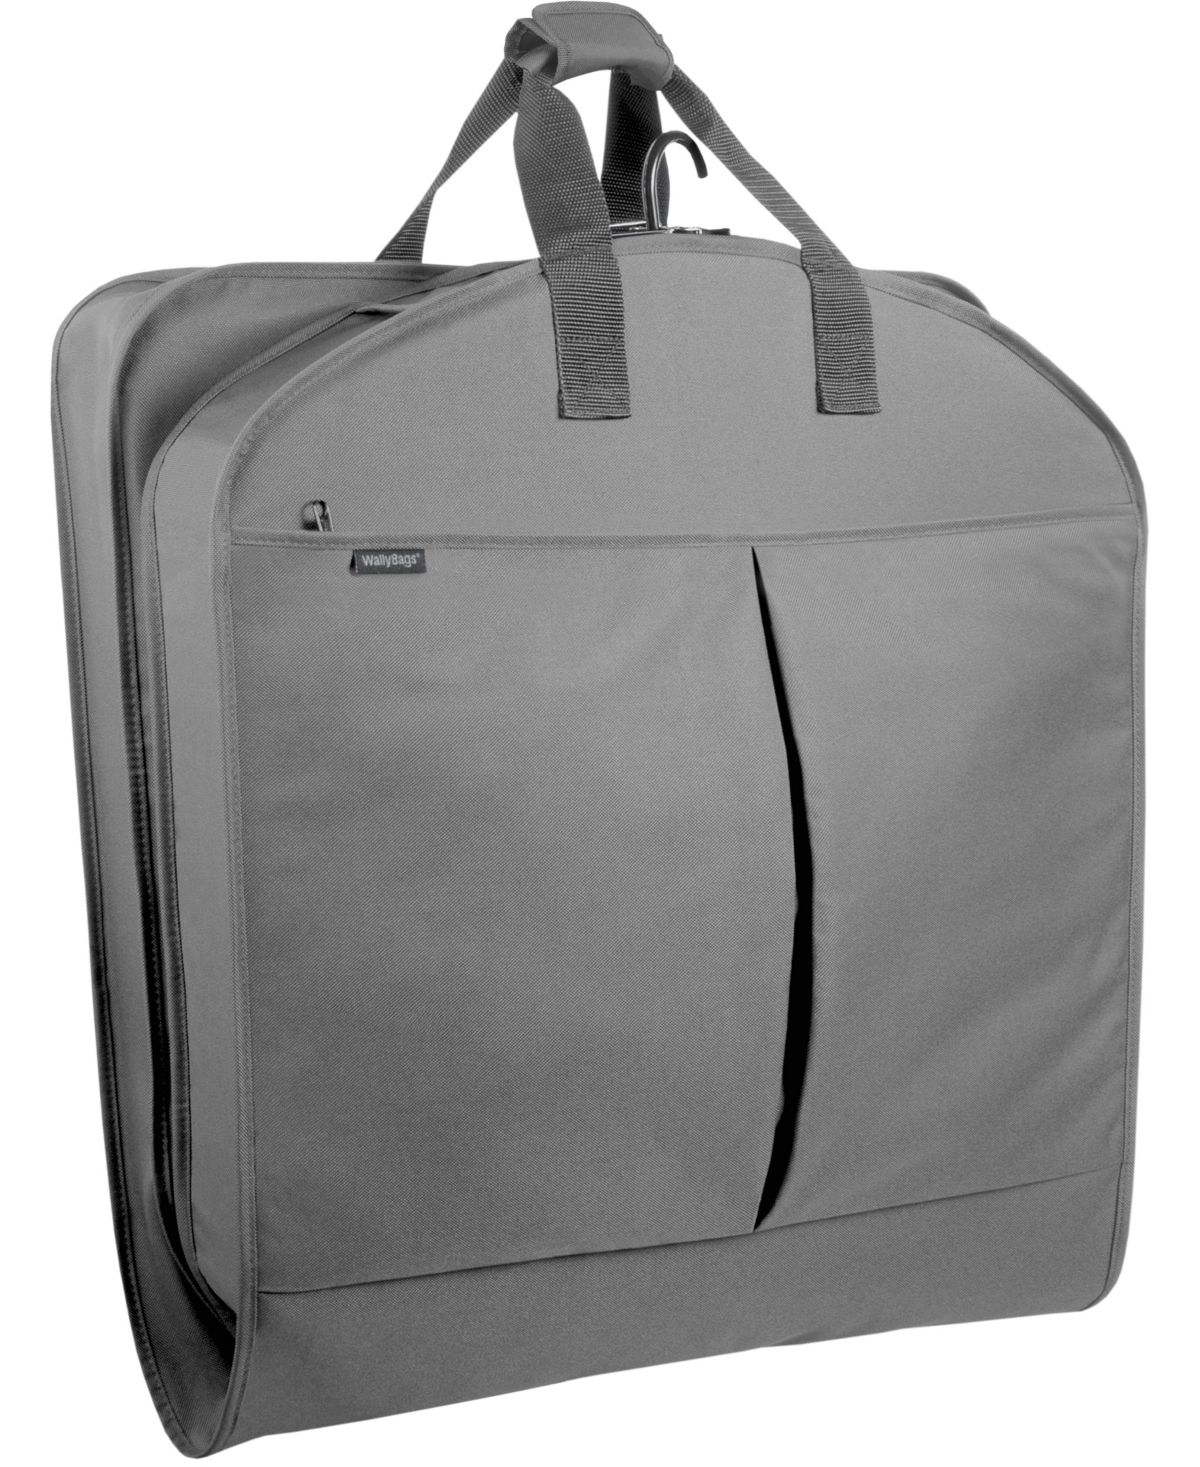 Shop Wallybags 45" Deluxe Extra Capacity Travel Garment Bag With Accessory Pockets In Gray